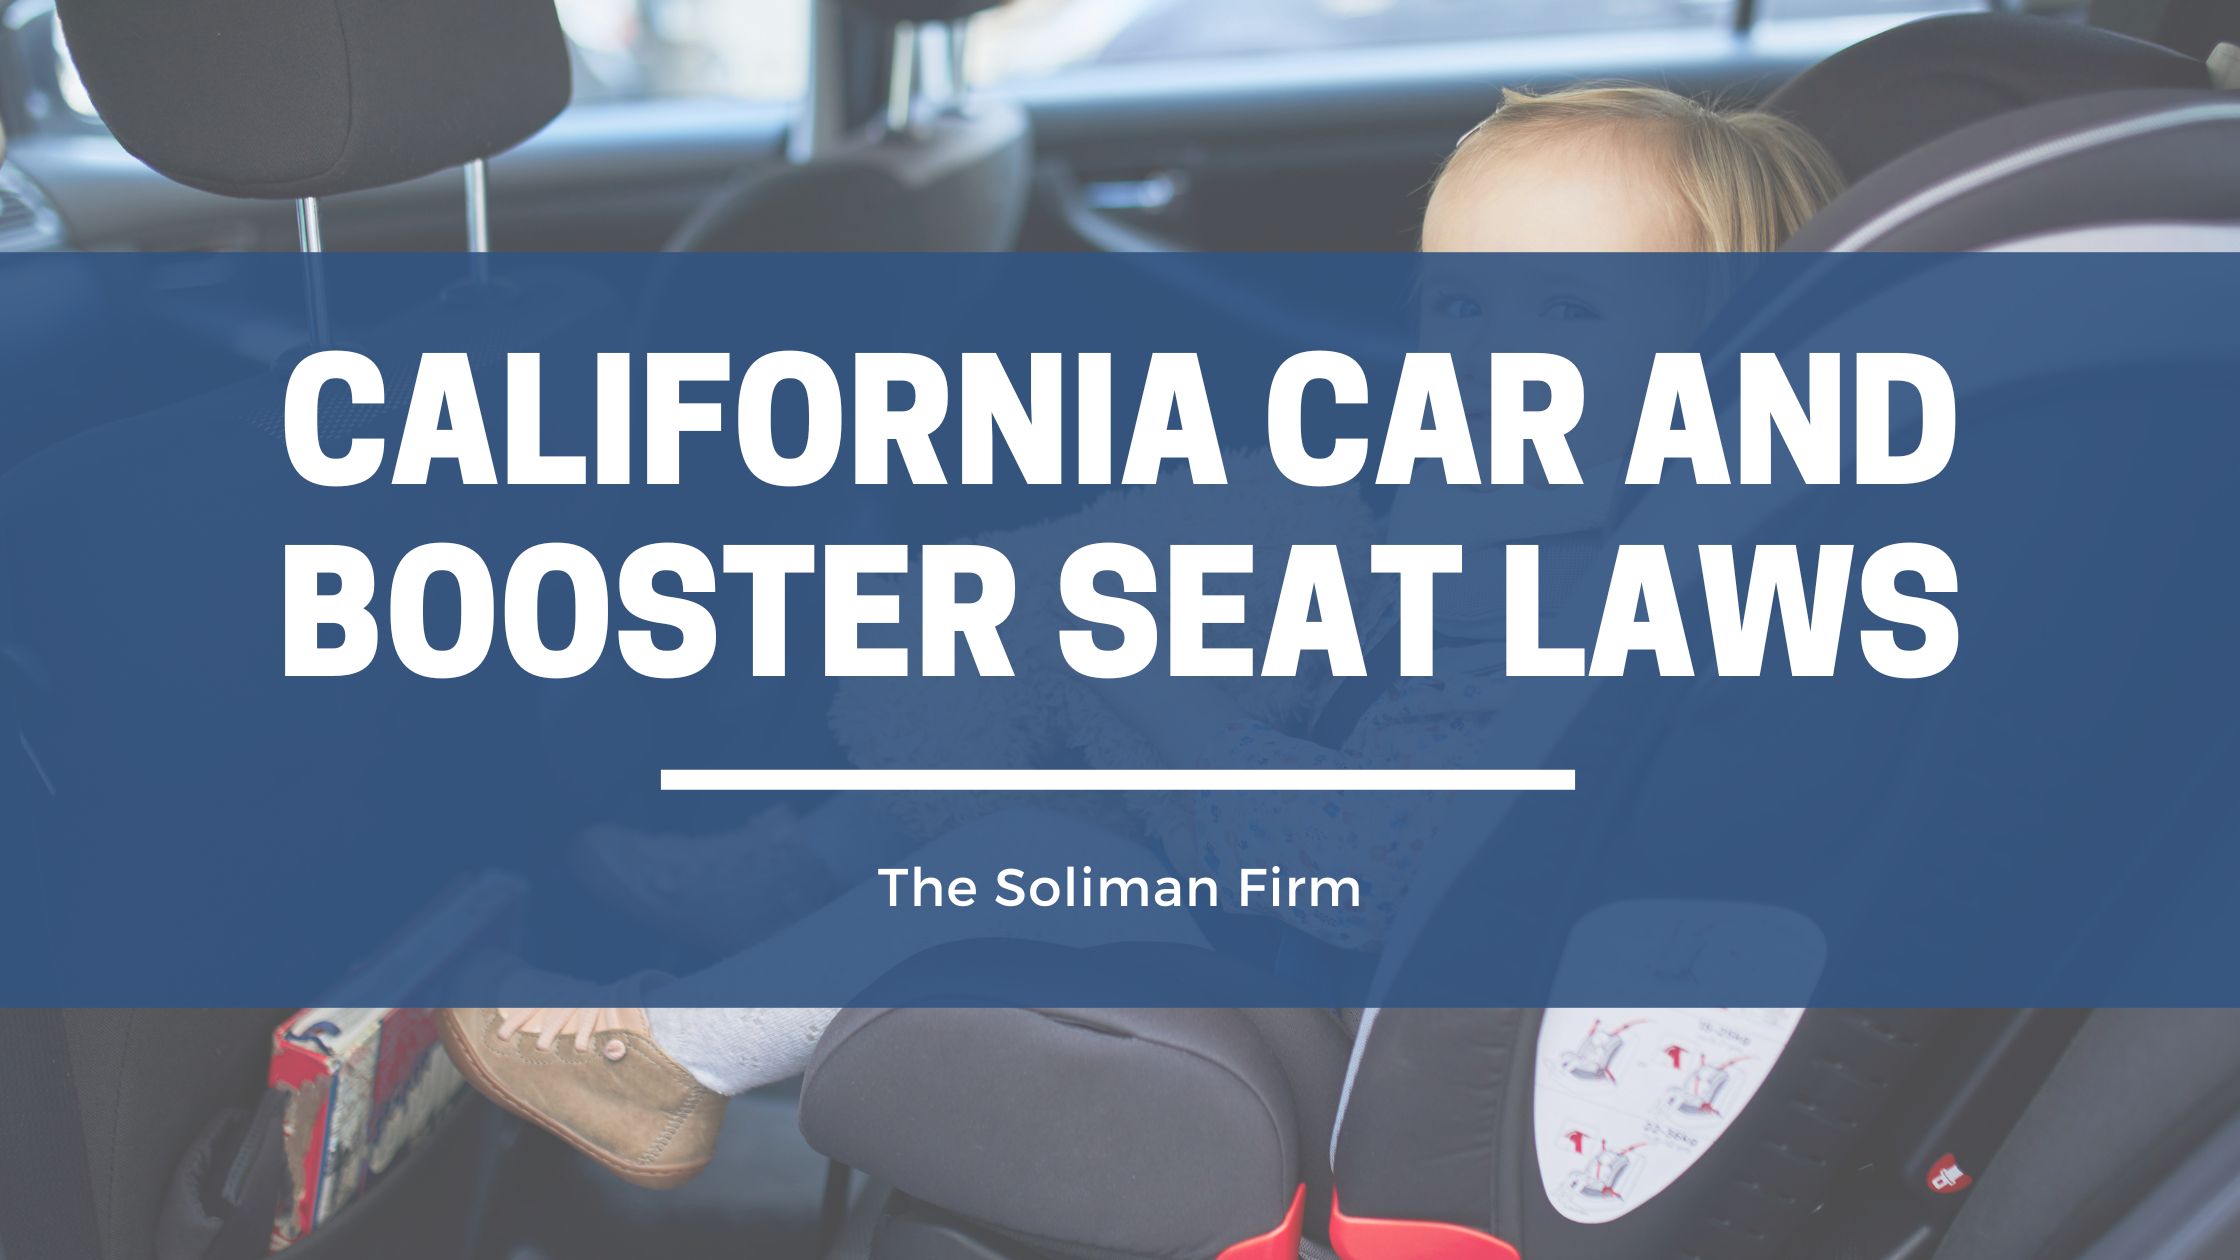 California Car and Booster Seat Laws The Soliman Firm, PLC